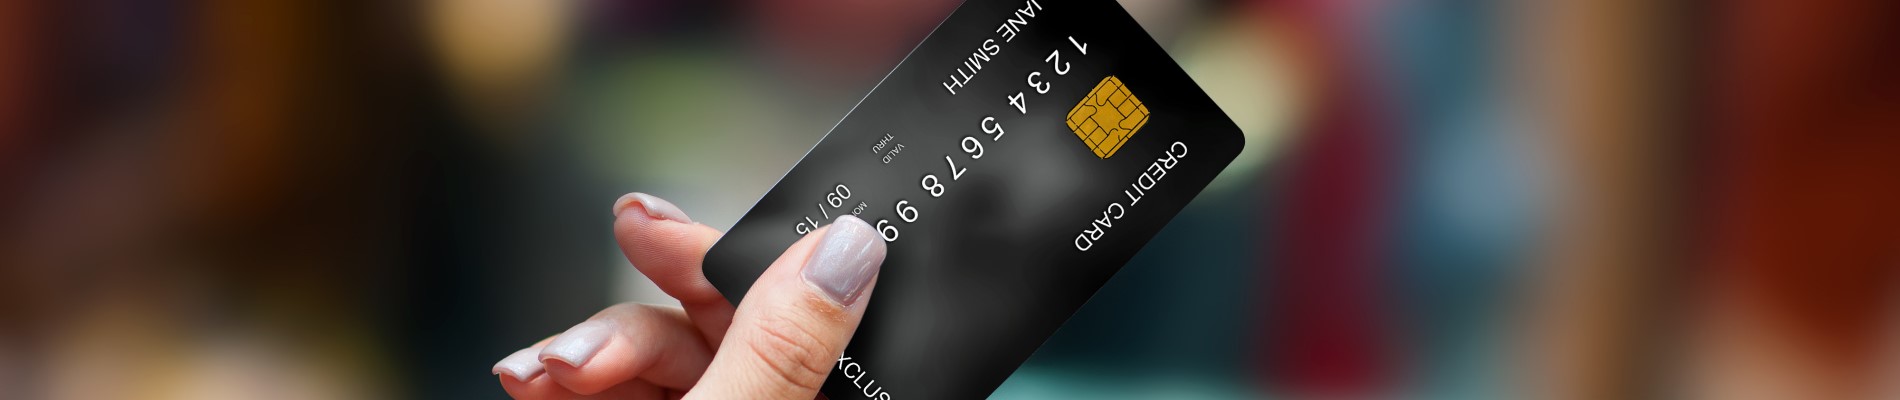 Banner paying with credit card image